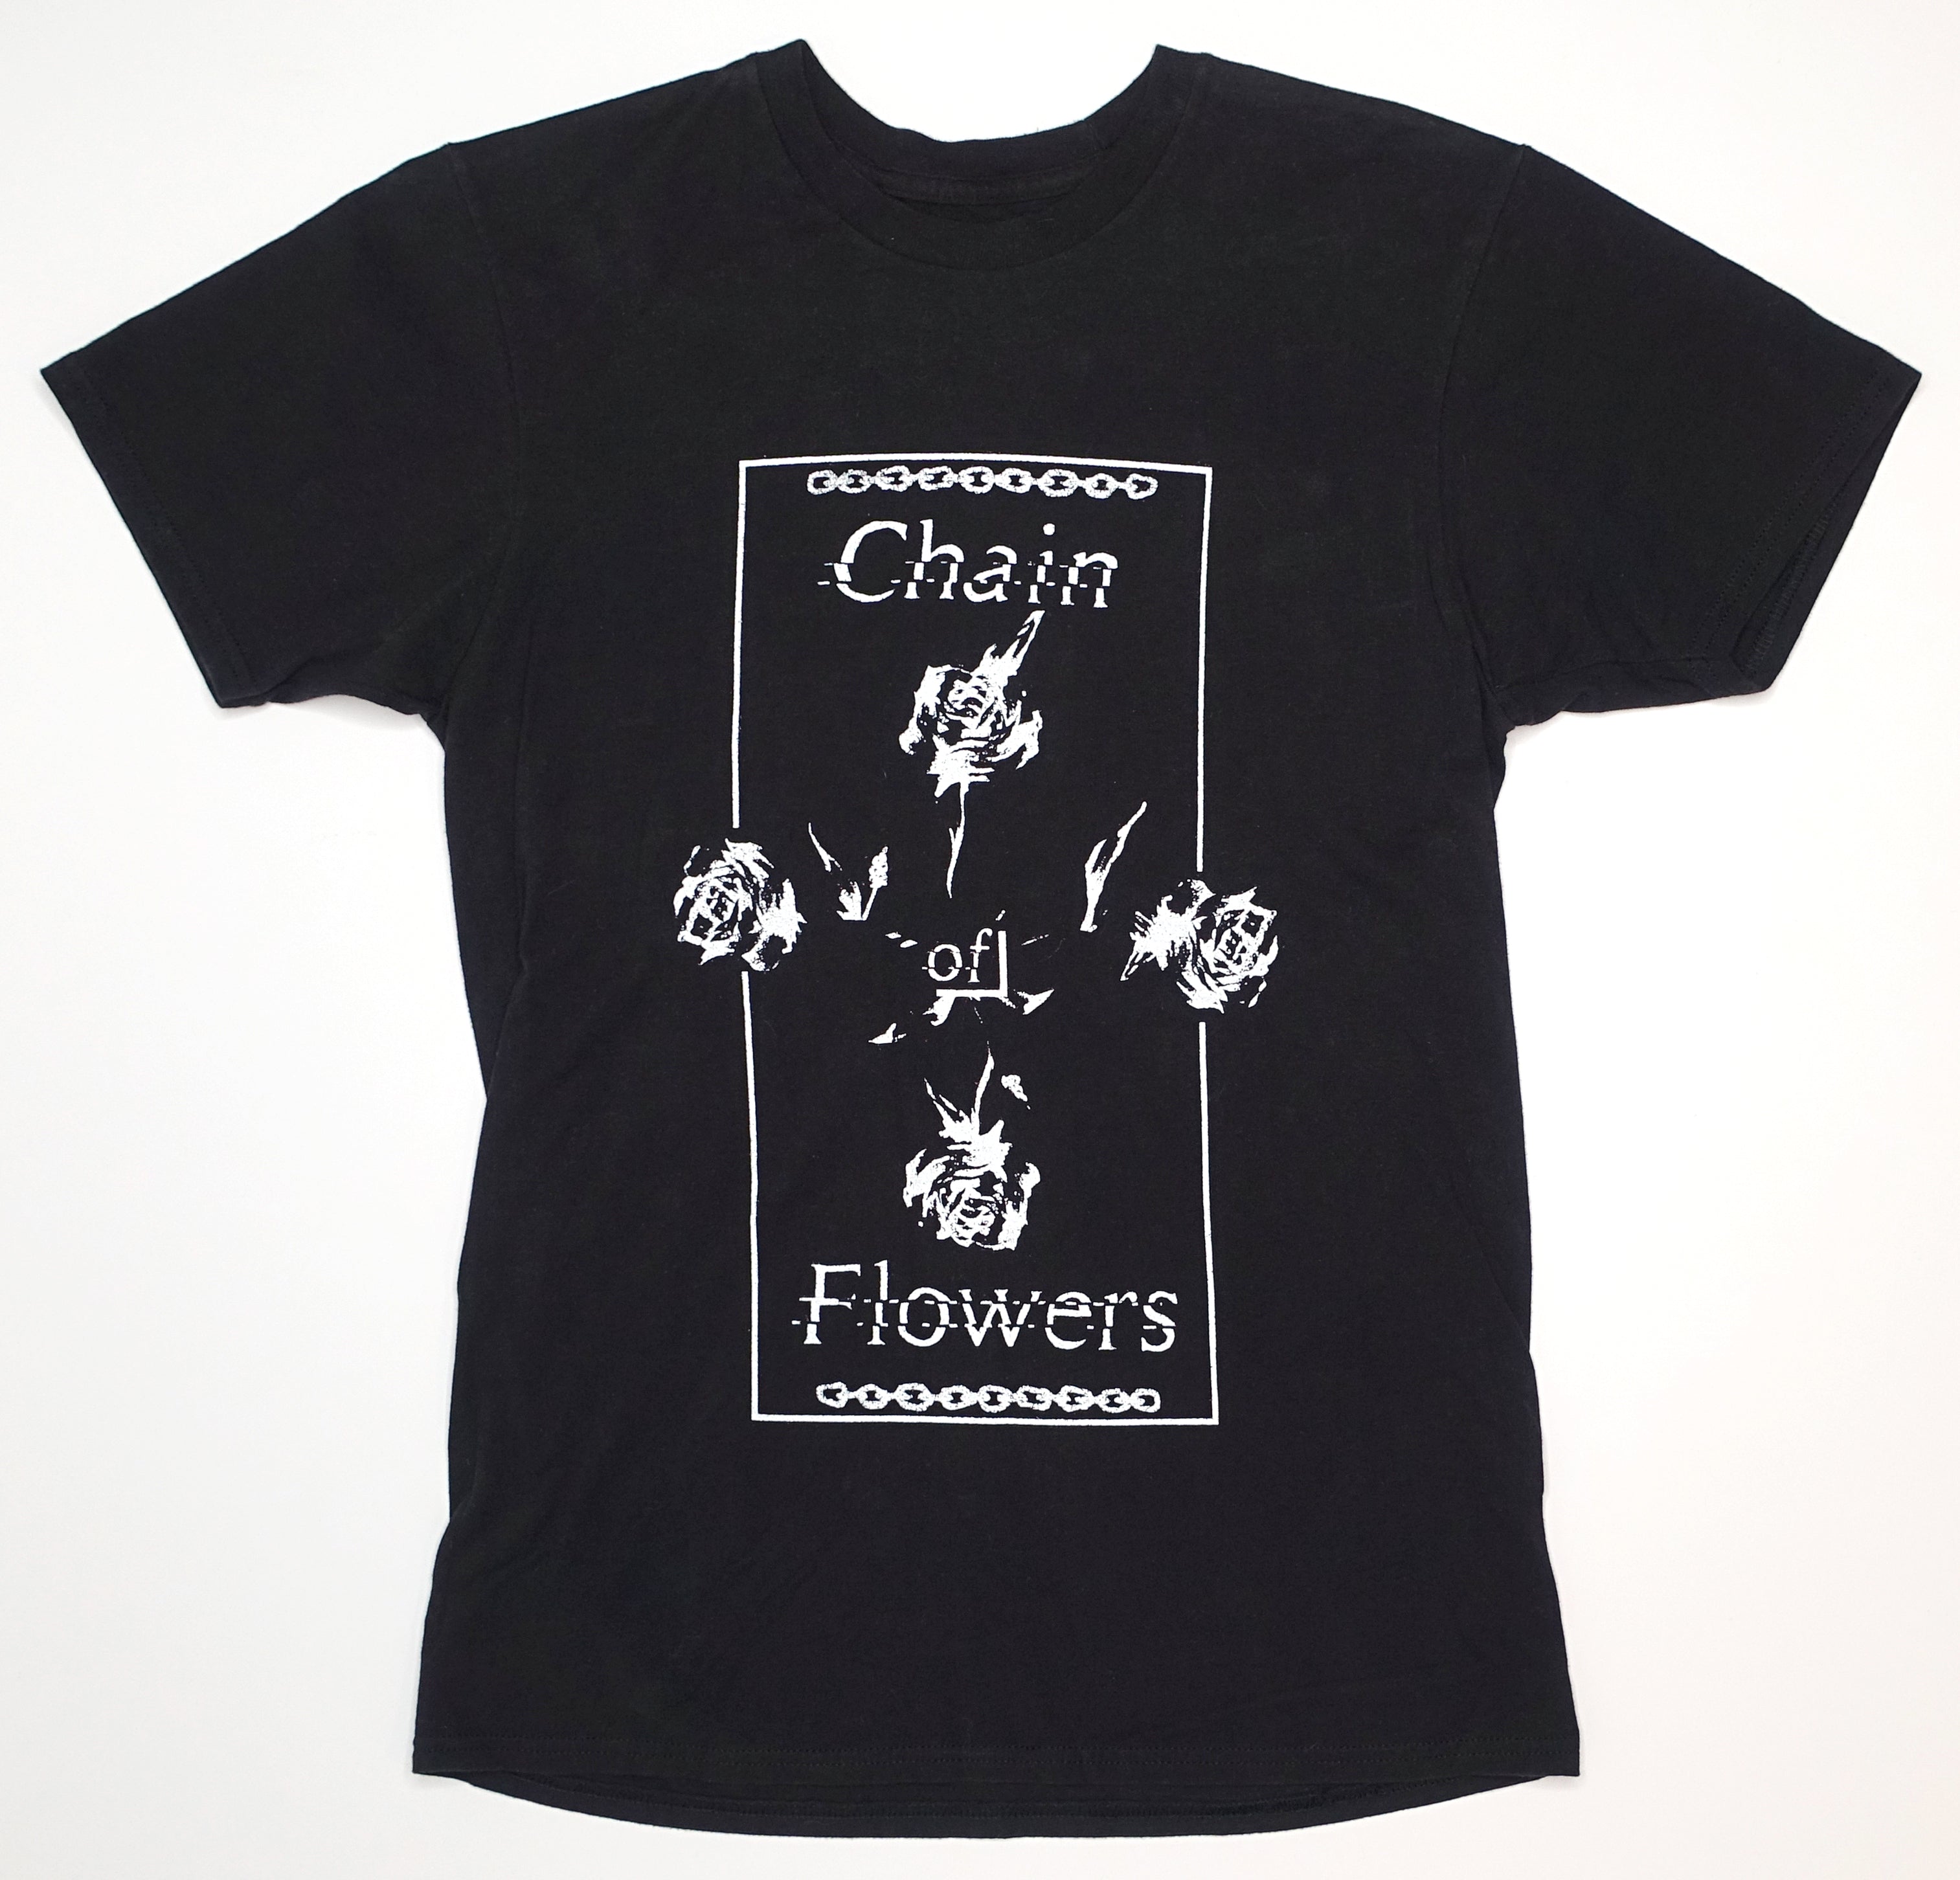 Chain Of Flowers – Let Your Light In Shirt Size Small